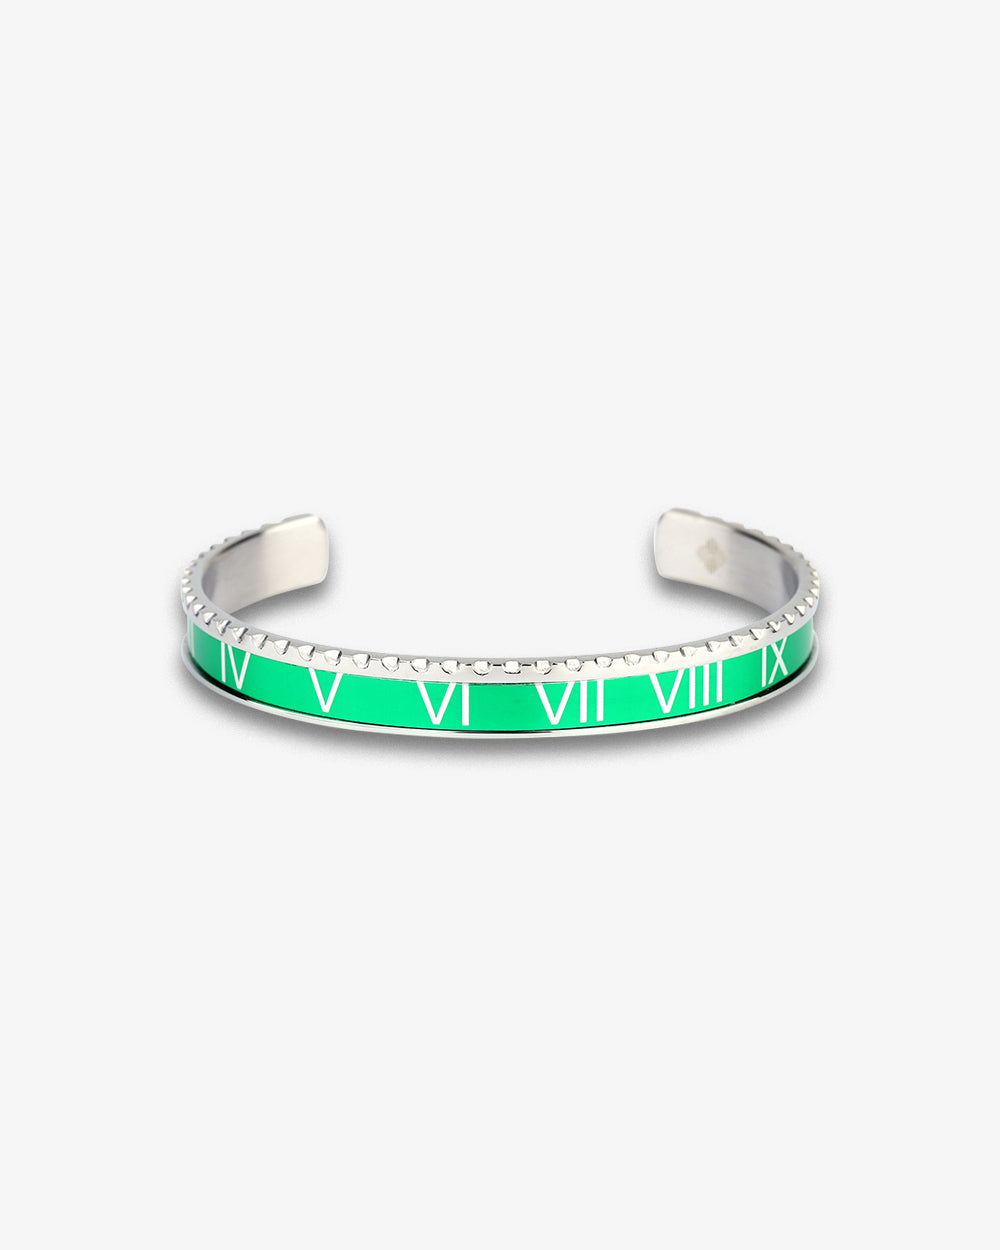 Swiss Concept Classic Roman Numeral Speed Bracelet (Green & Stainless Steel) - Stainless Steel